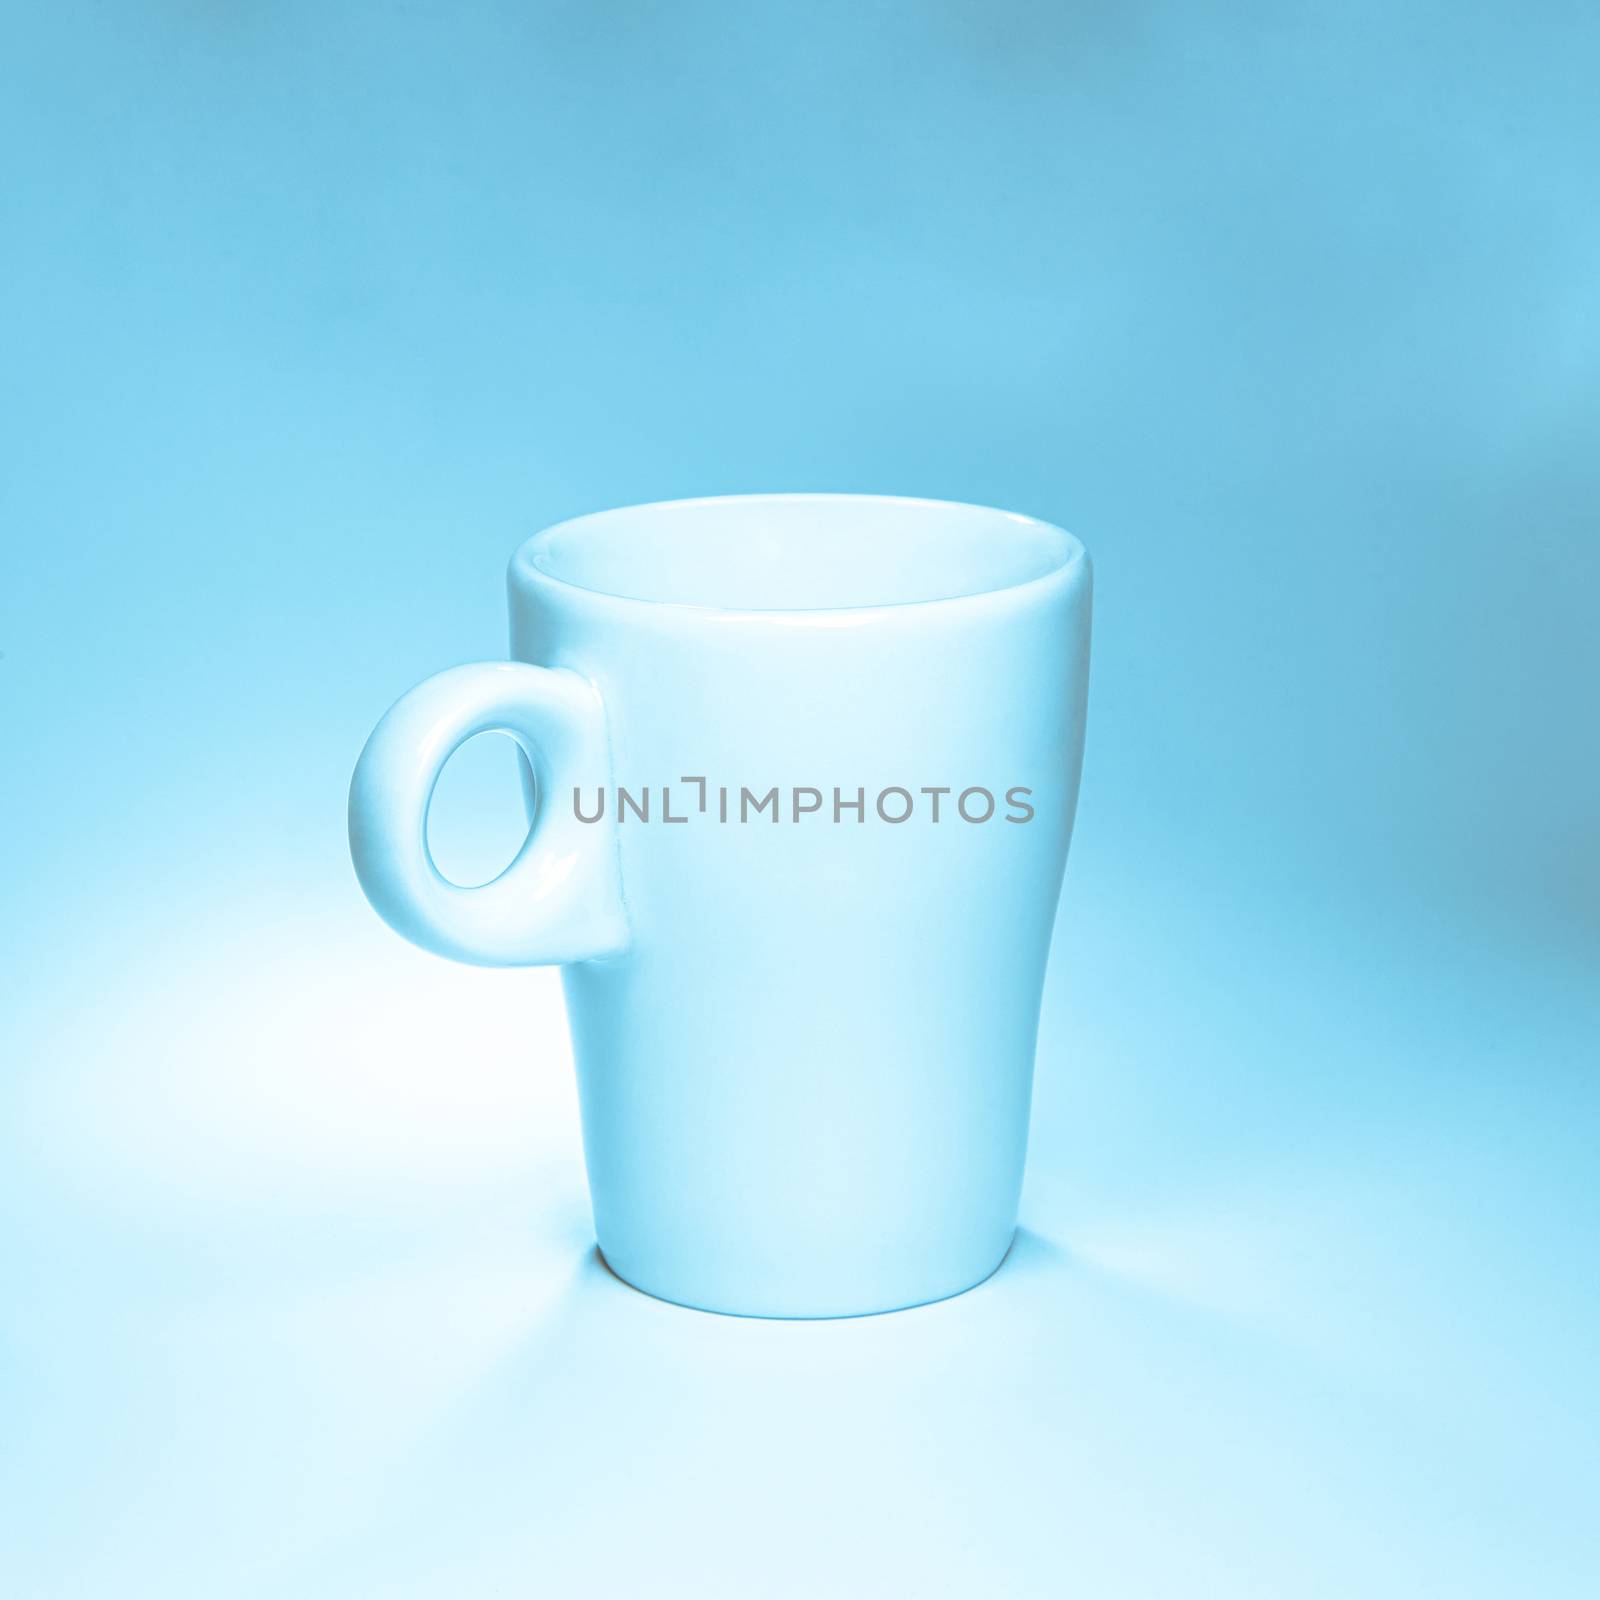 clean luxury coffee cup on blue and white background